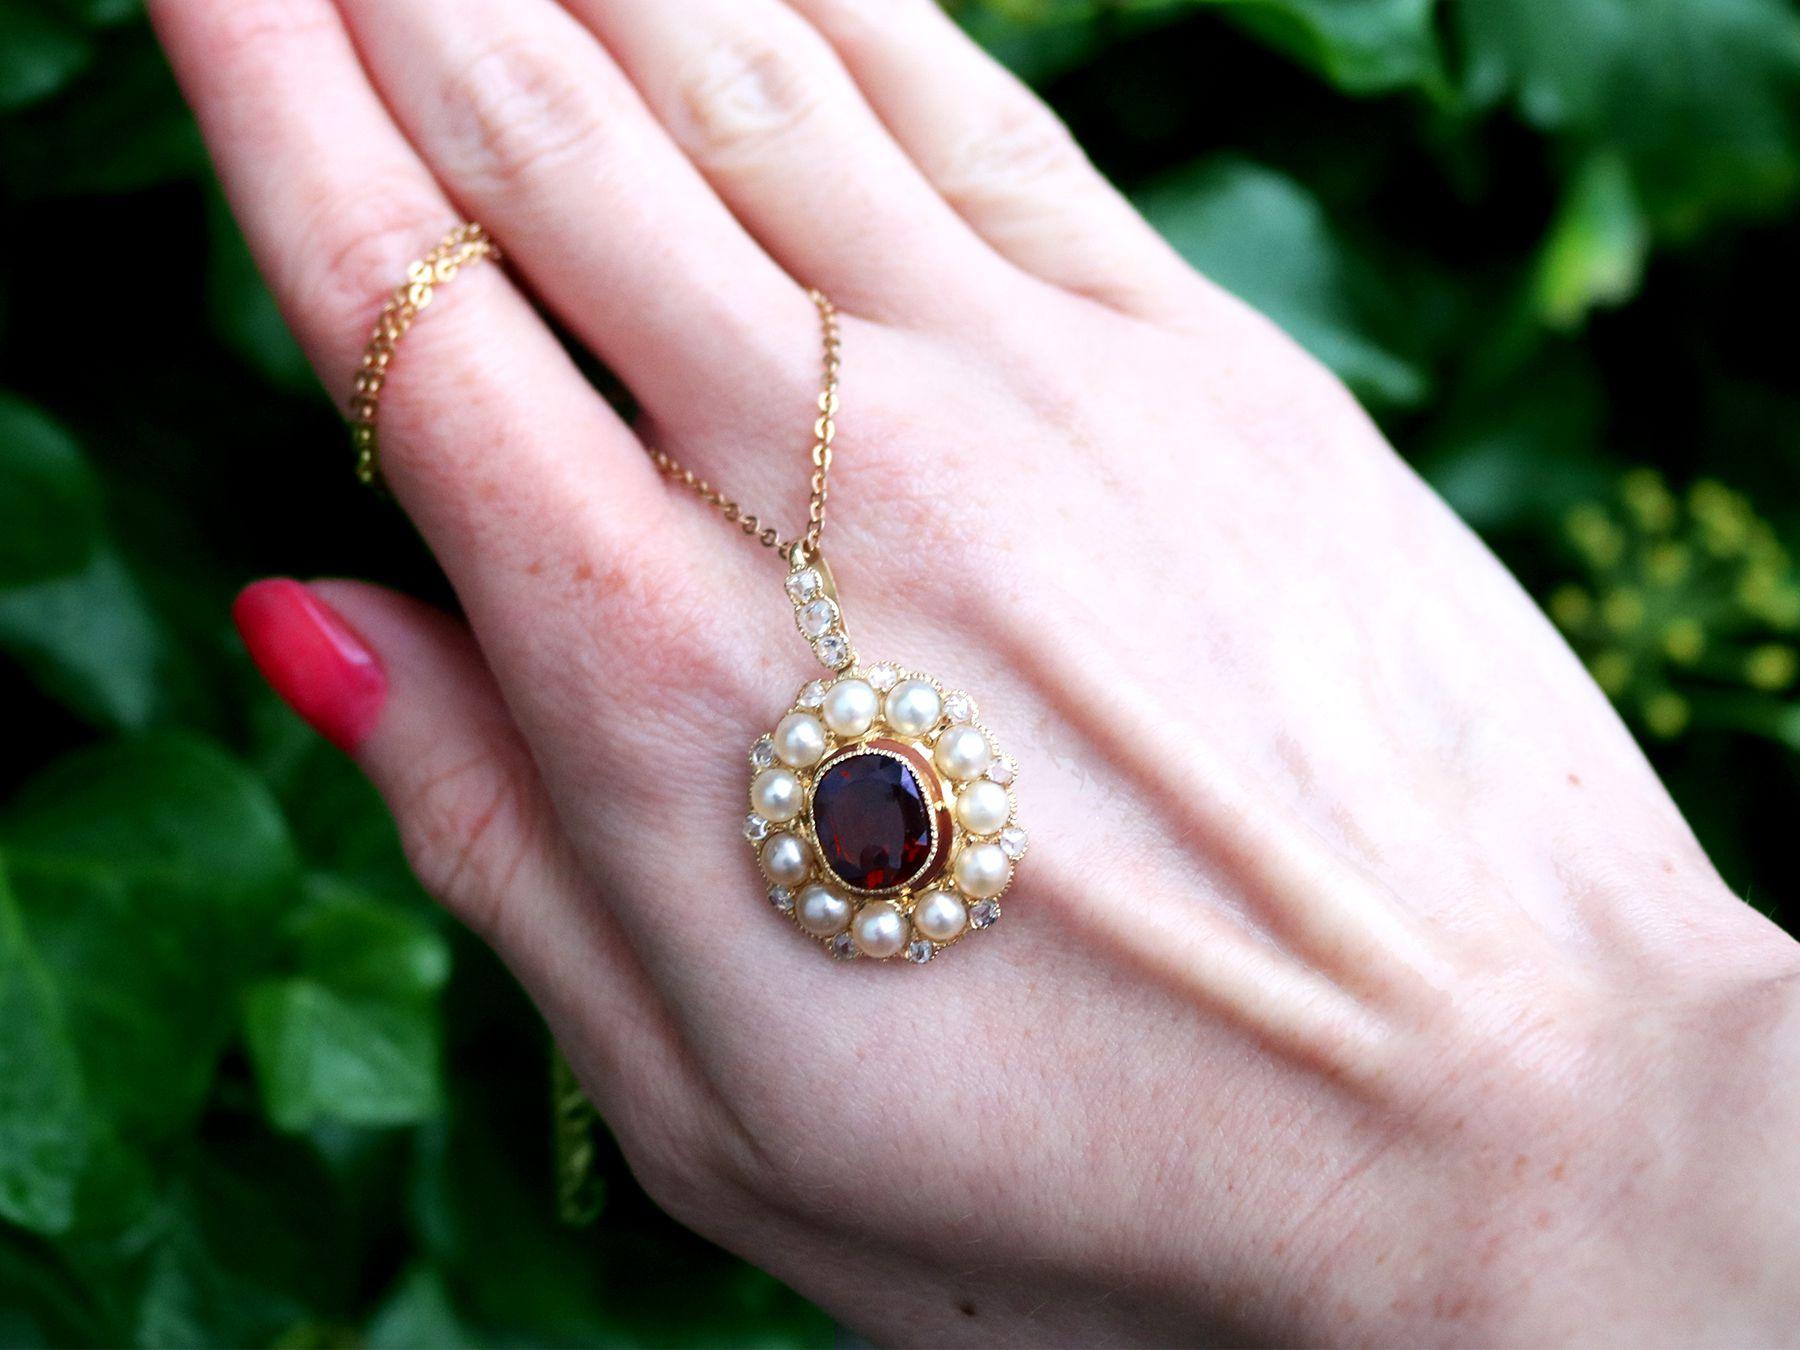 A stunning, fine and impressive 2.96 carat garnet and 0.72 carat diamond, 12k yellow gold pendant - boxed; an addition to our antique jewelry and estate jewelry collections

This impressive antique pendant has been crafted in 12 karat yellow gold